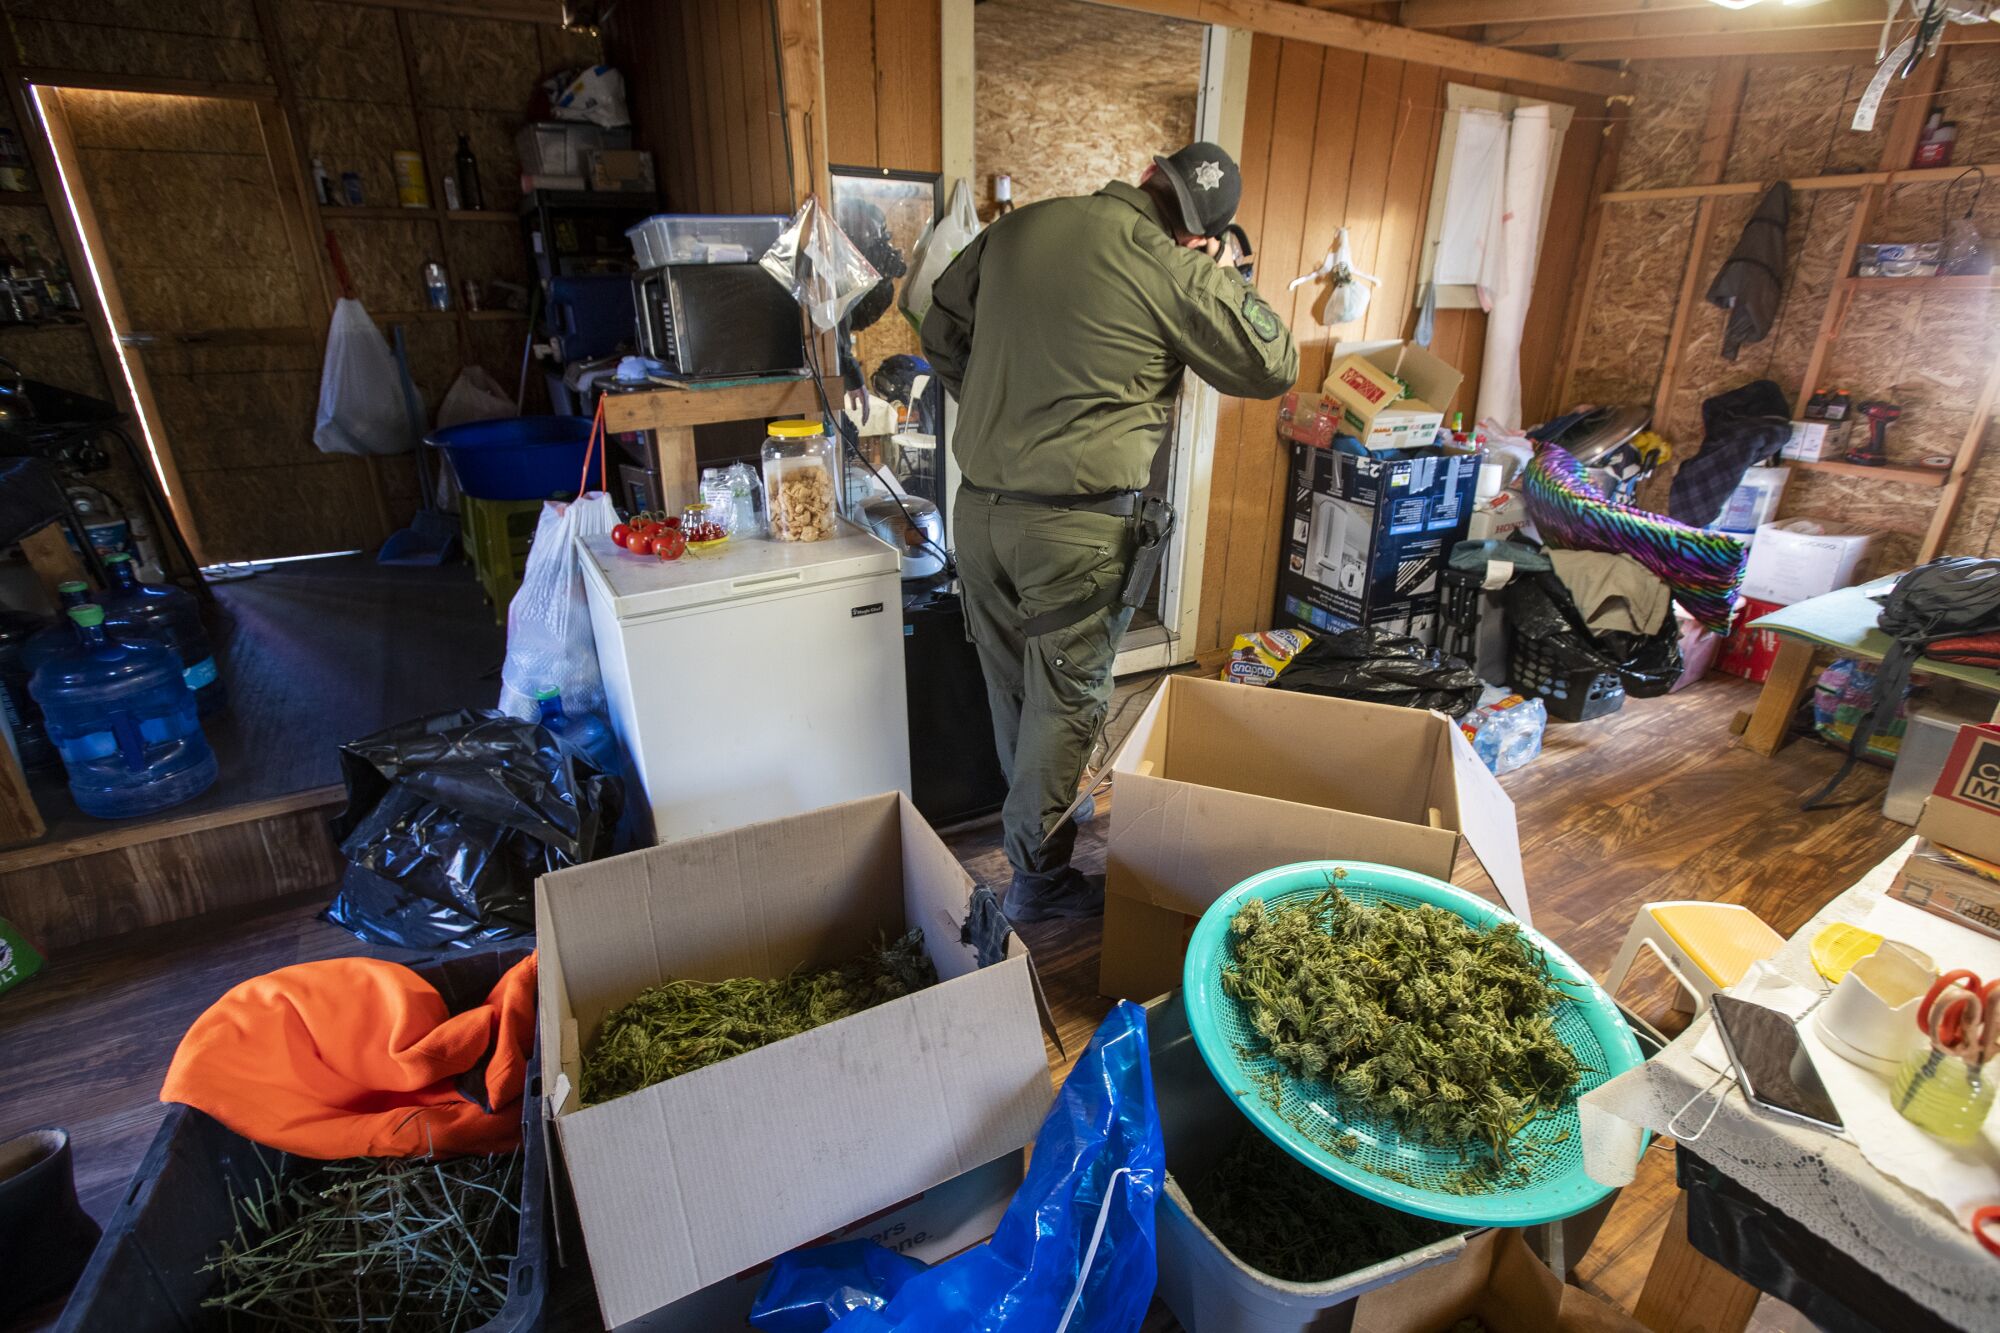 A sheriff's deputy serving a search warrant takes photographs in inside a plywood home in the Mount Shasta Vista